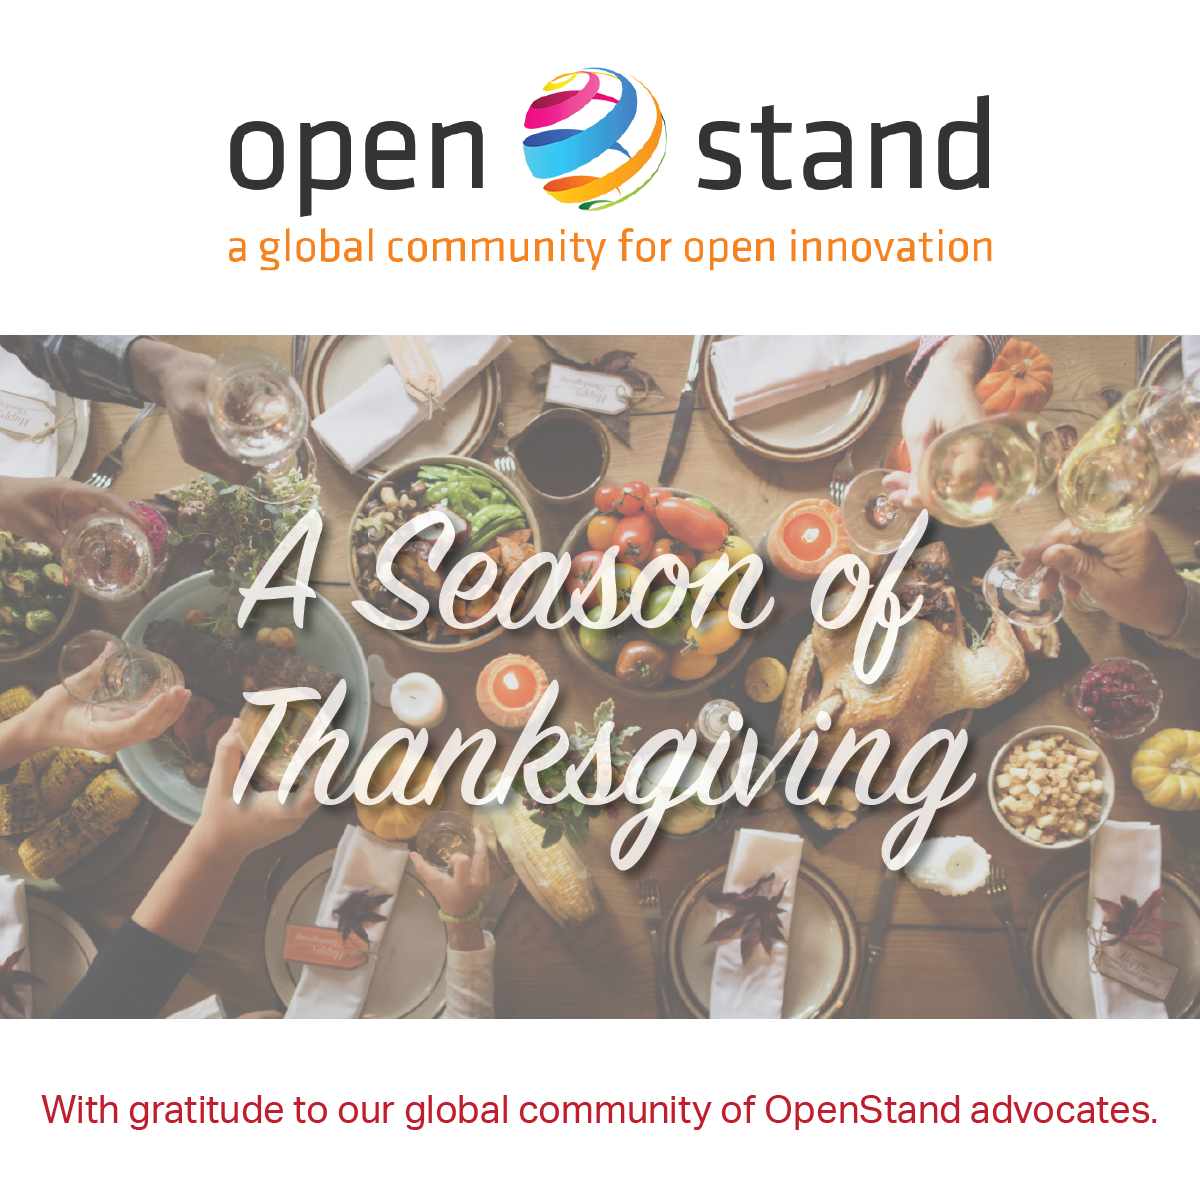 11-23-16_openstand-thanksgiving-graphic-v3